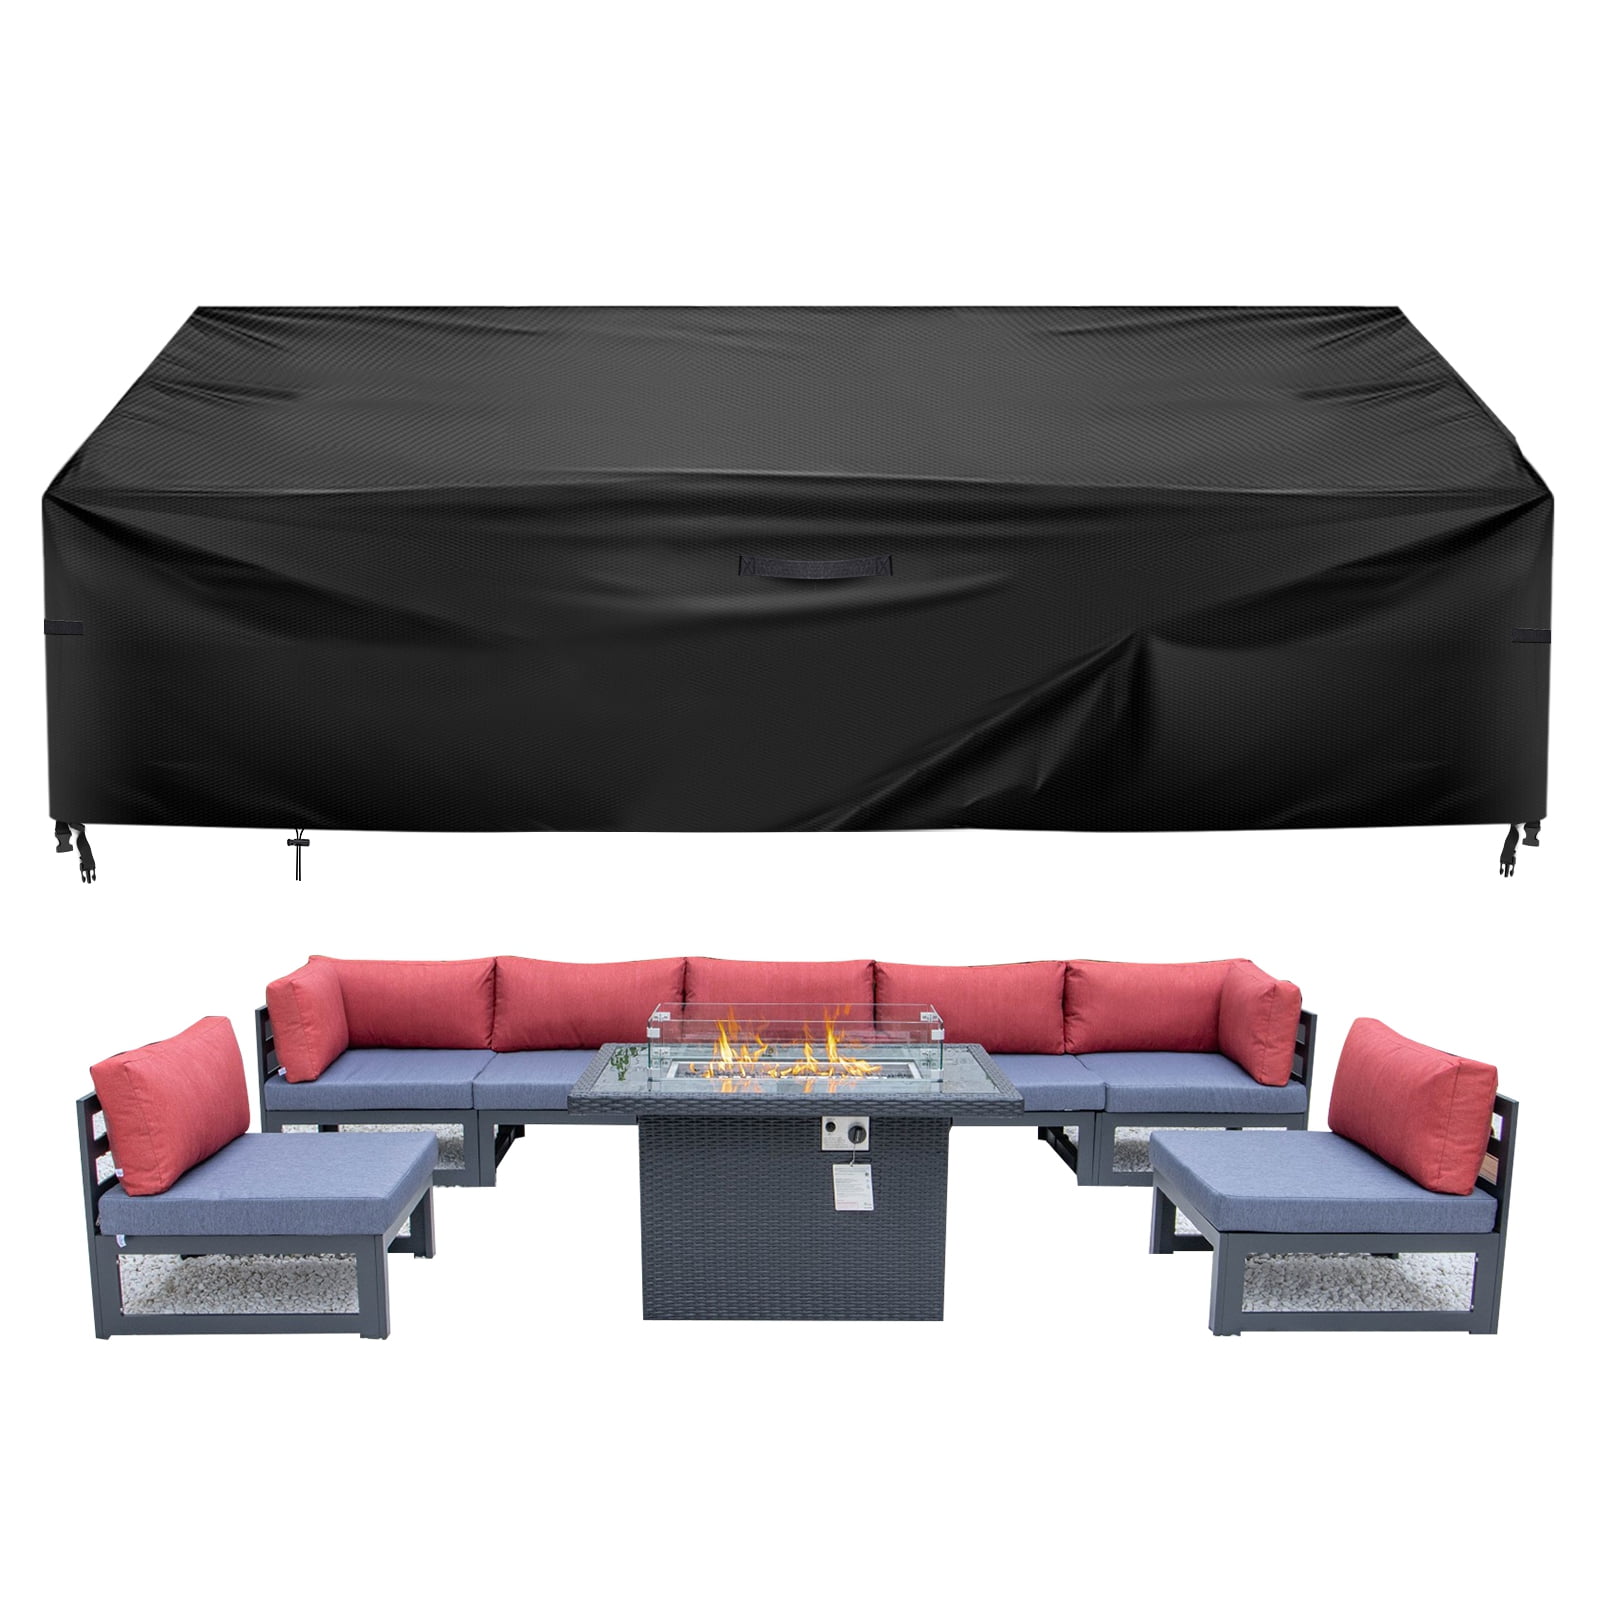 30'' x 25'' Gas Fire Pit Table Patio Cover Waterproof Rain Snow Protector 